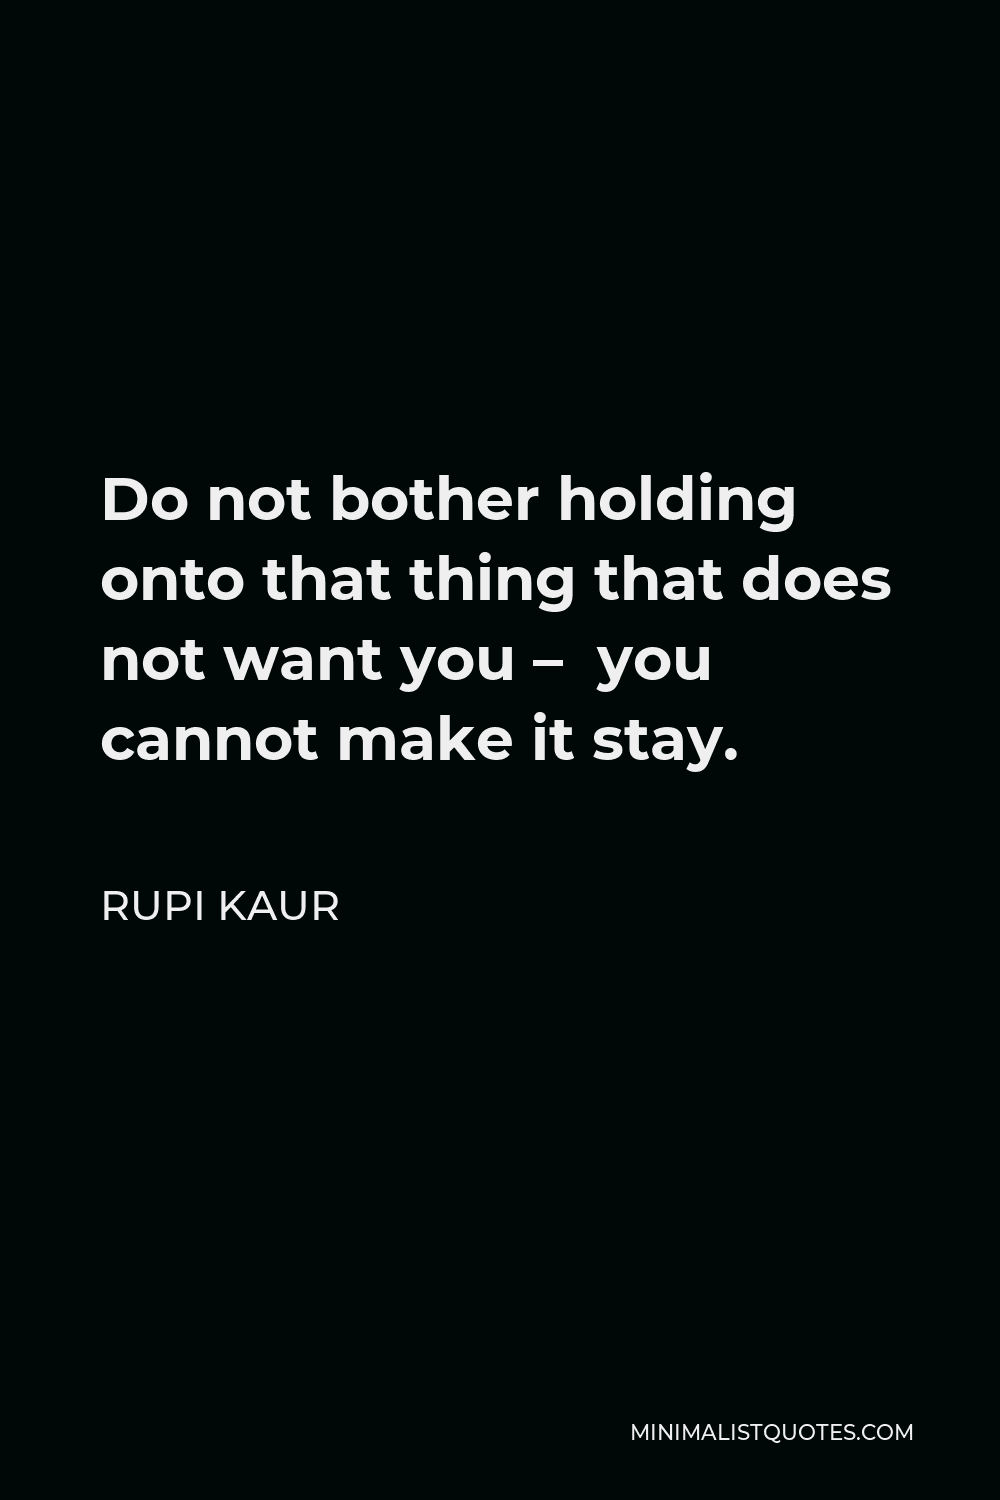 Rupi Kaur Quote - Do not bother holding onto that thing that does not want you – you cannot make it stay.